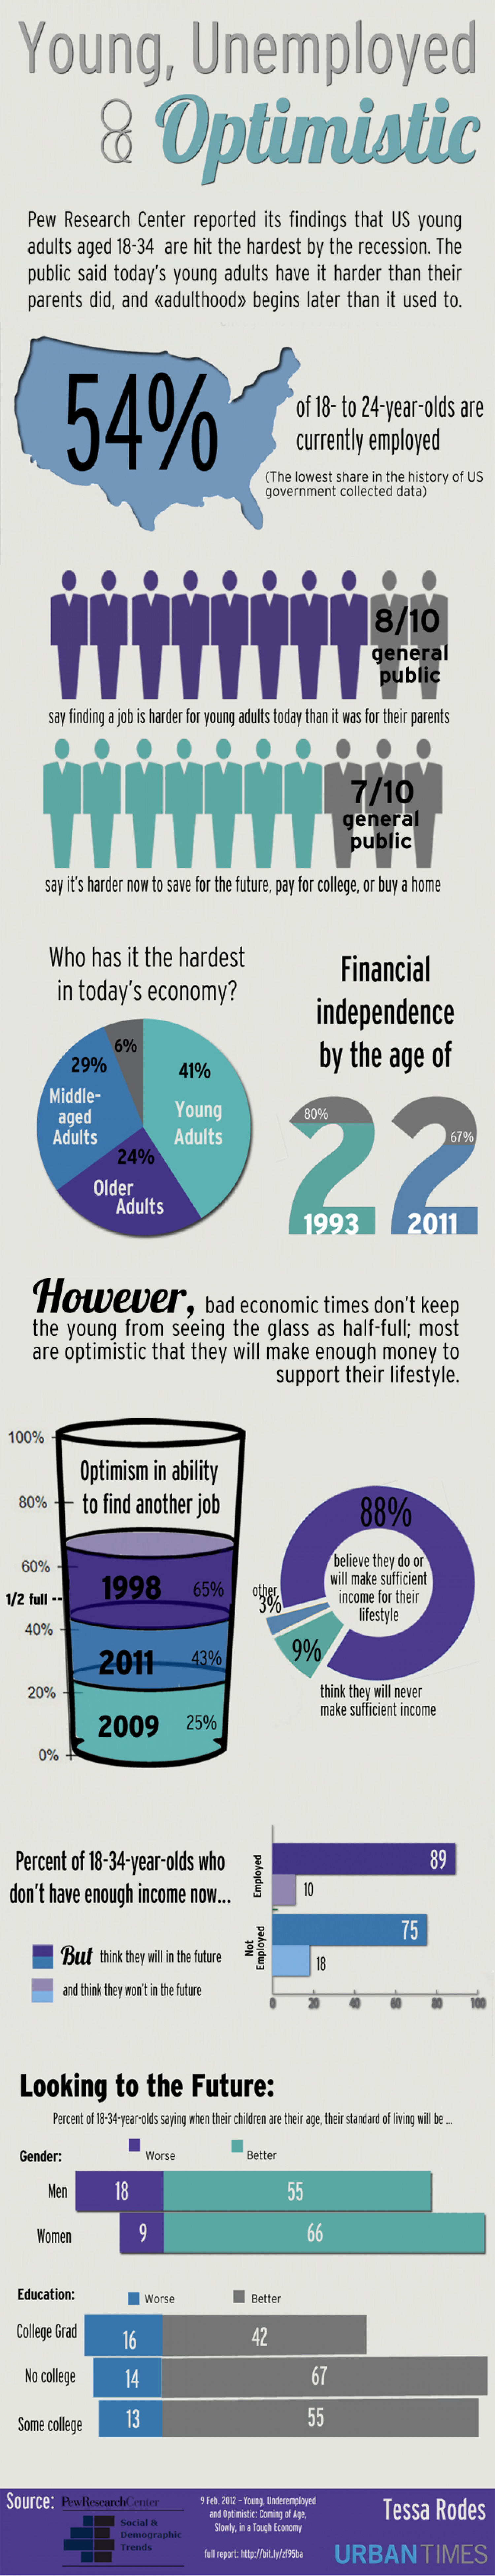 Young, Unemployed and Optimistic Infographic